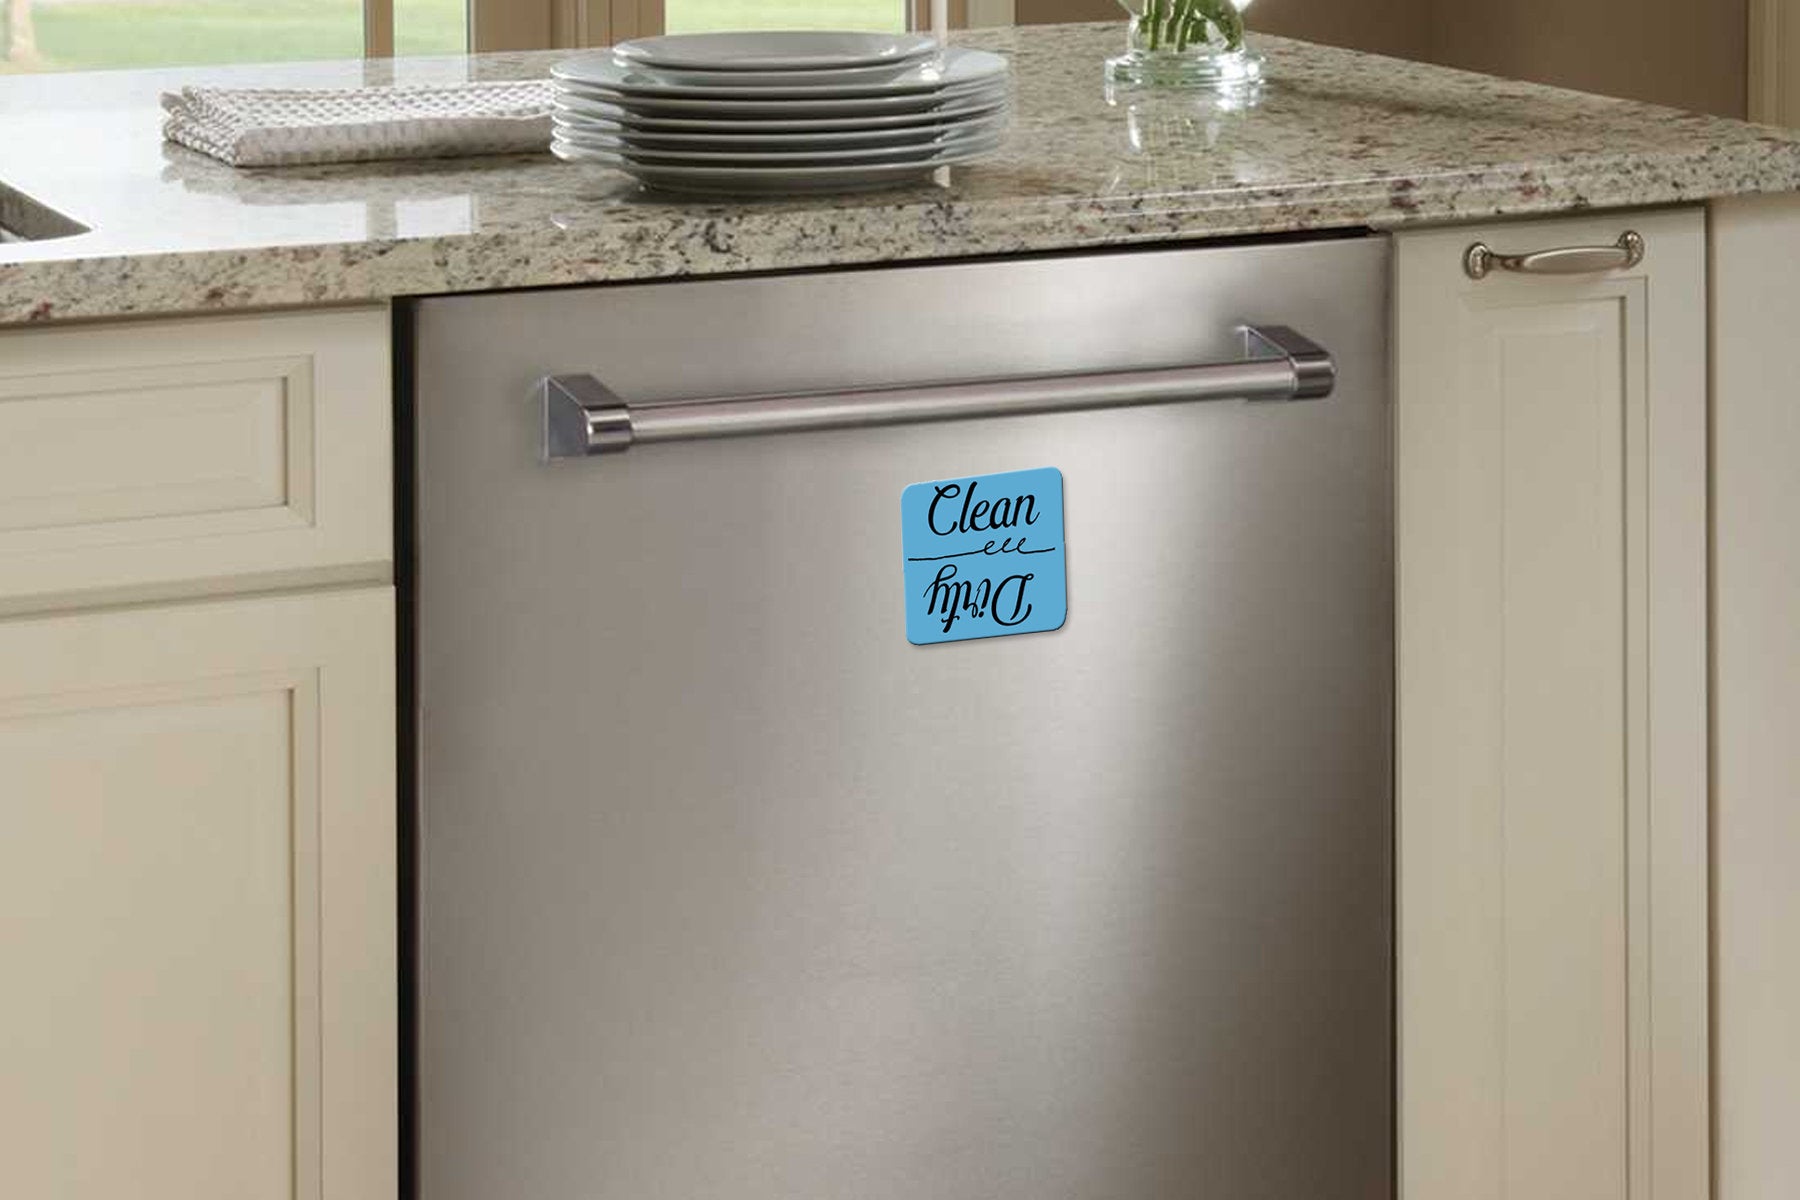 Dirty/Clean Dishwasher Magnet